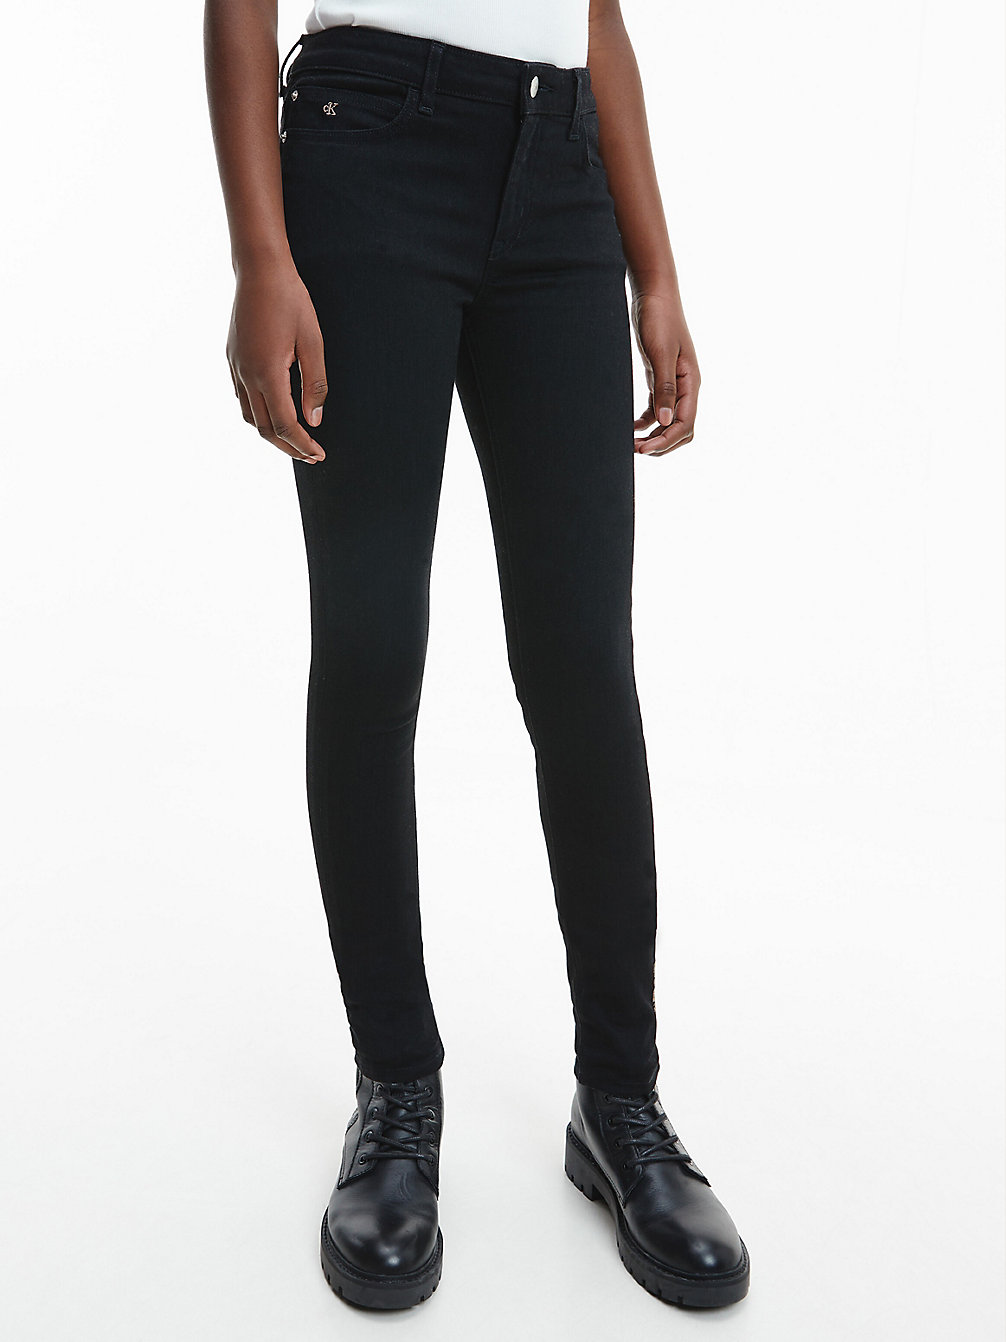 CLEAN BLACK STRETCH Mid Rise Skinny Jeans undefined Maedchen Calvin Klein